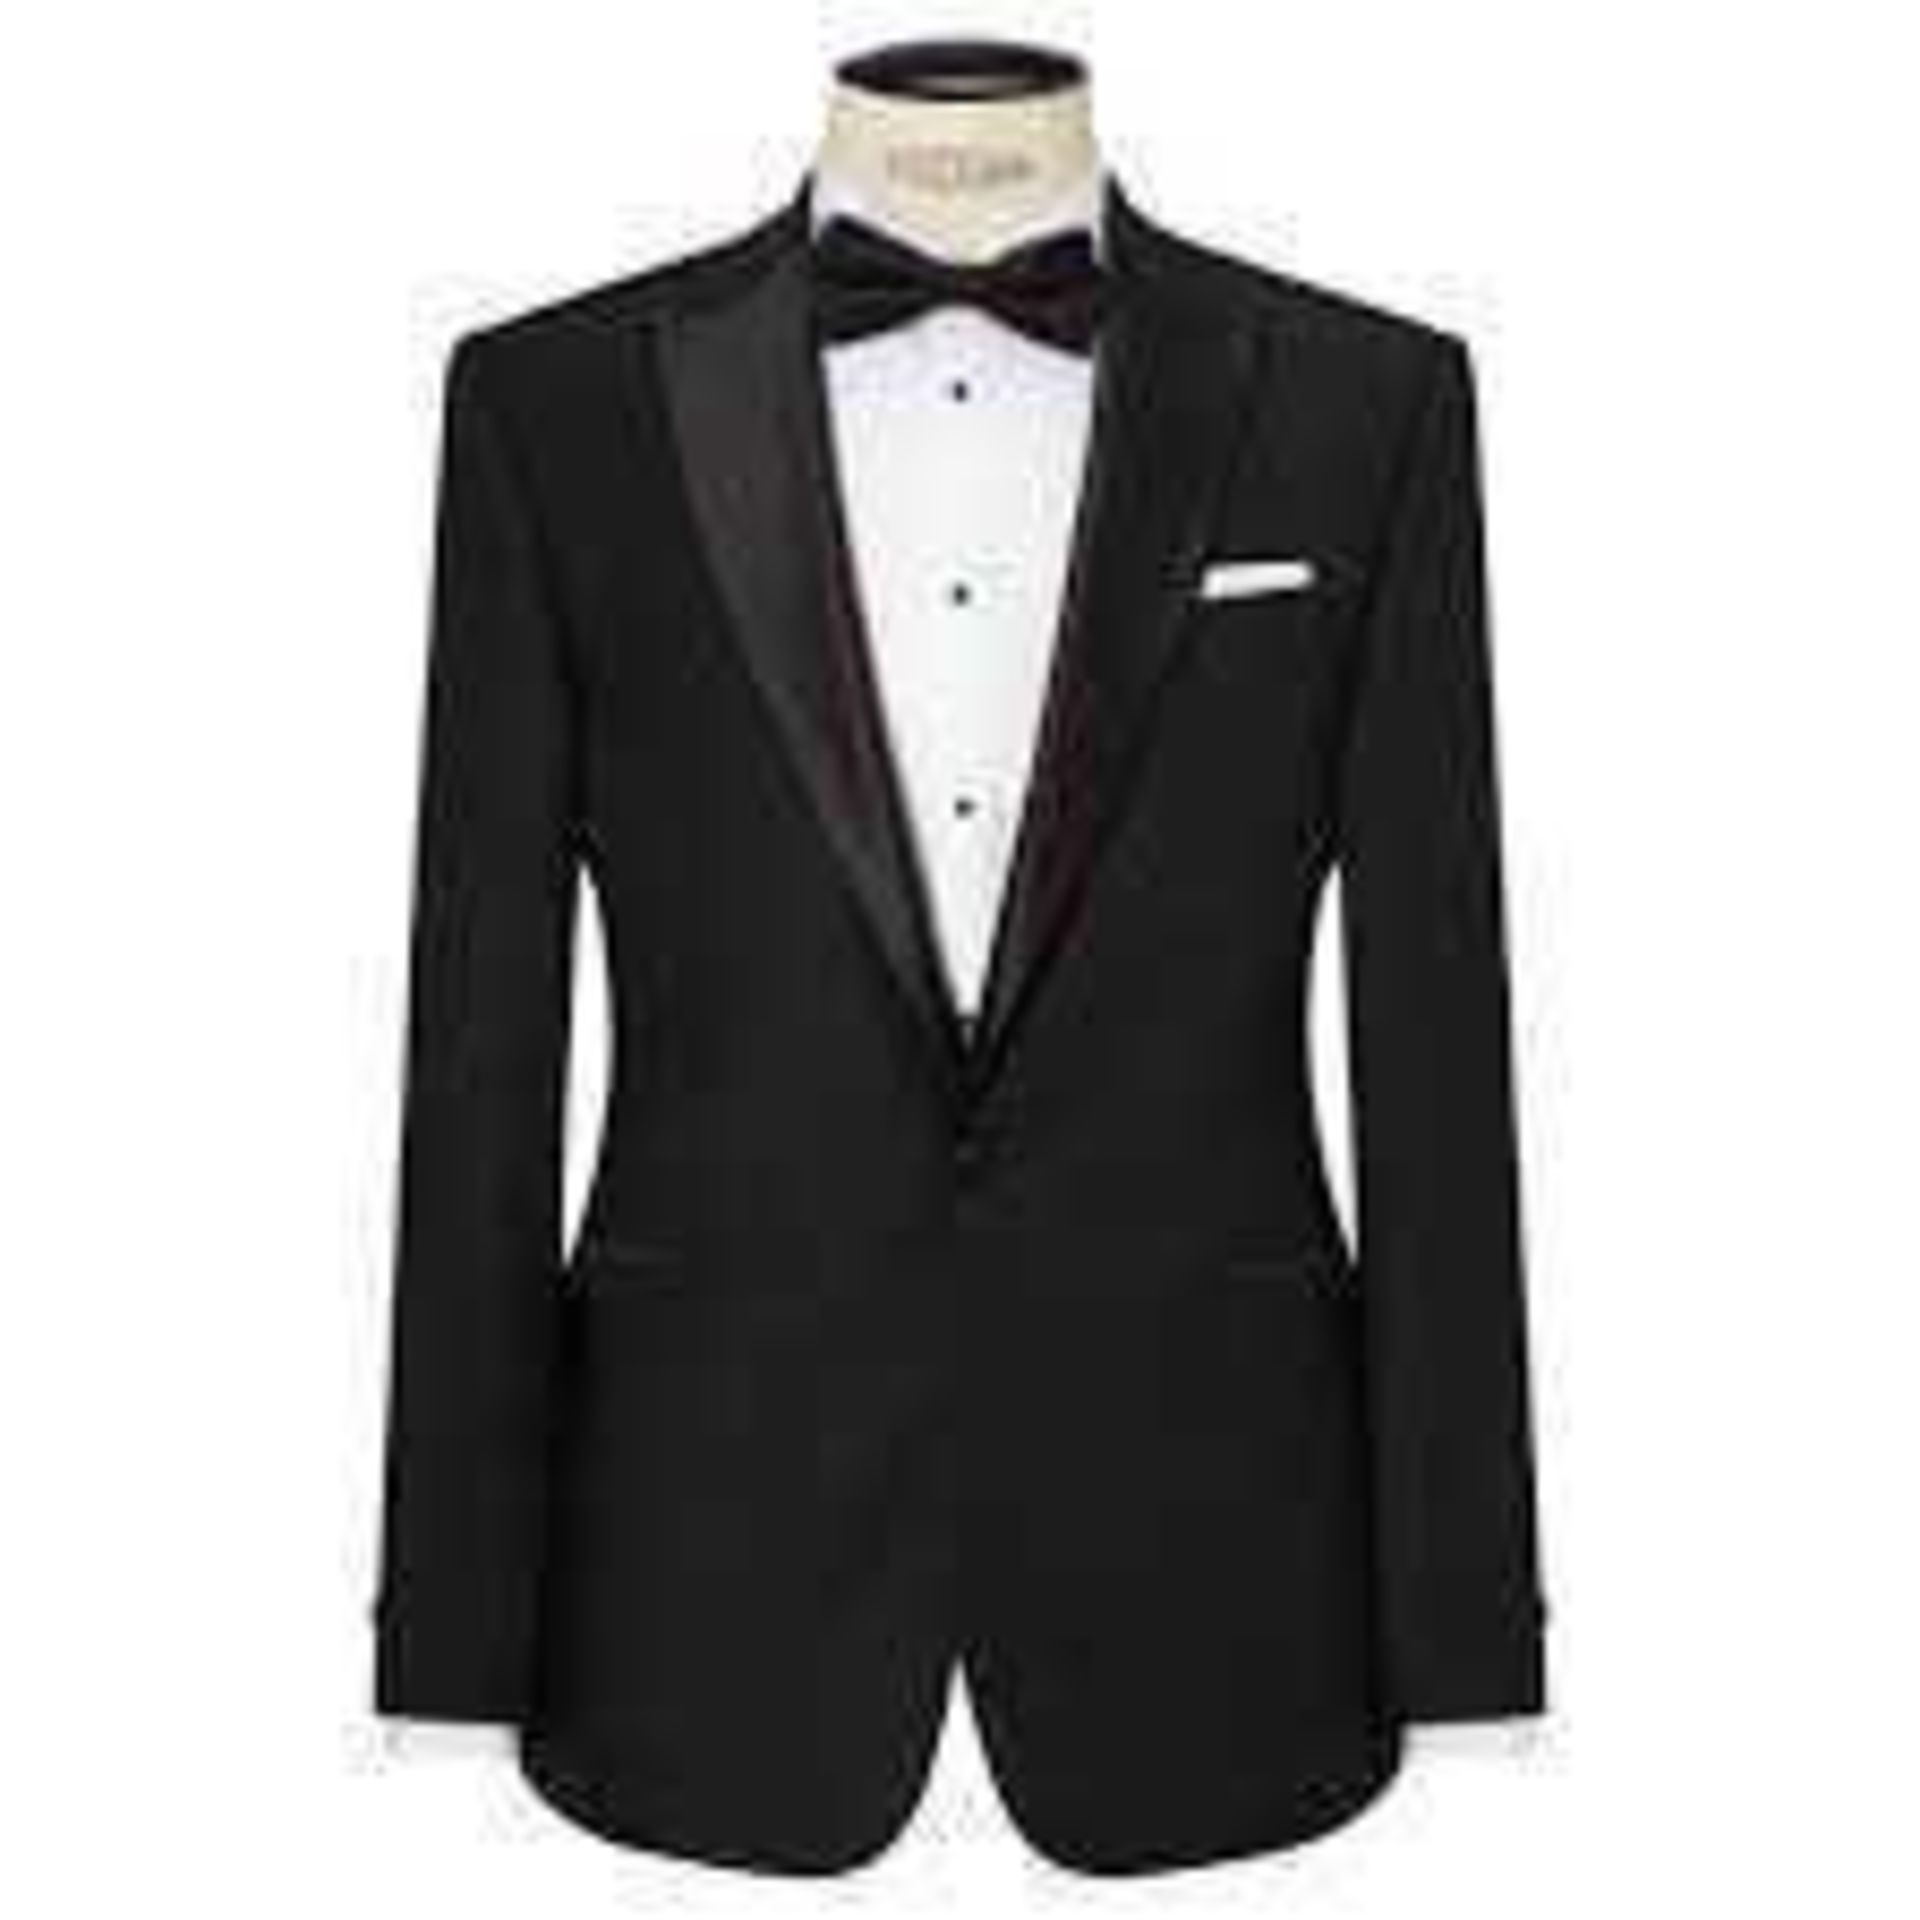 Combined RRP £190 Lot To Contain 2 Bagged Clothing Items 1 Black Silk Blazer, 1 Denim Jeans